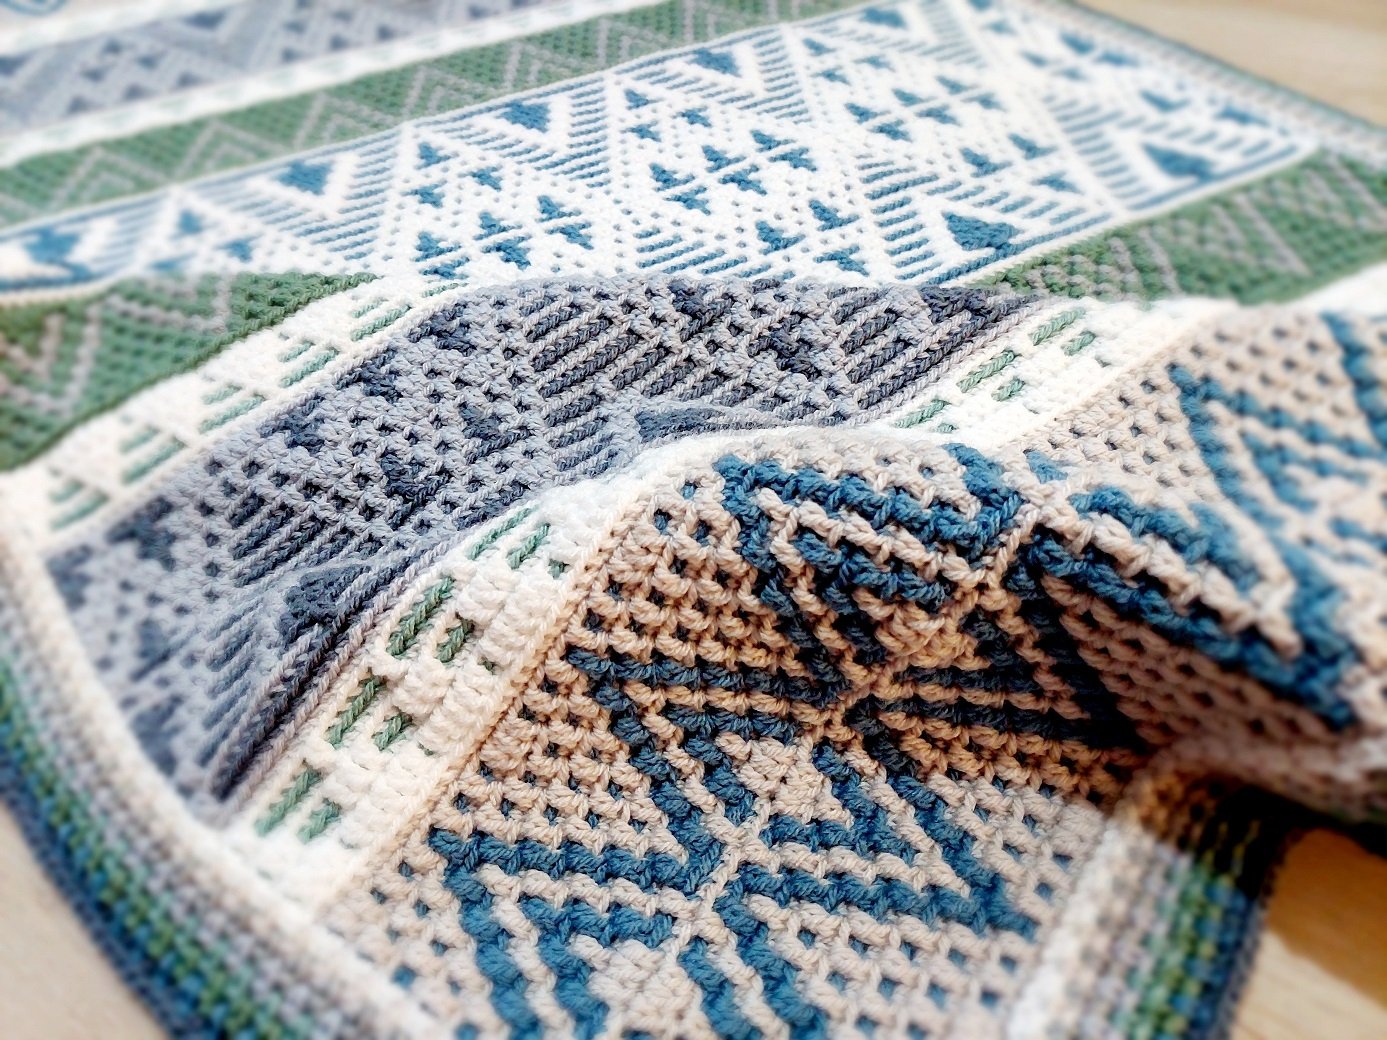 No Limits. Overlay mosaic crochet in rounds pattern